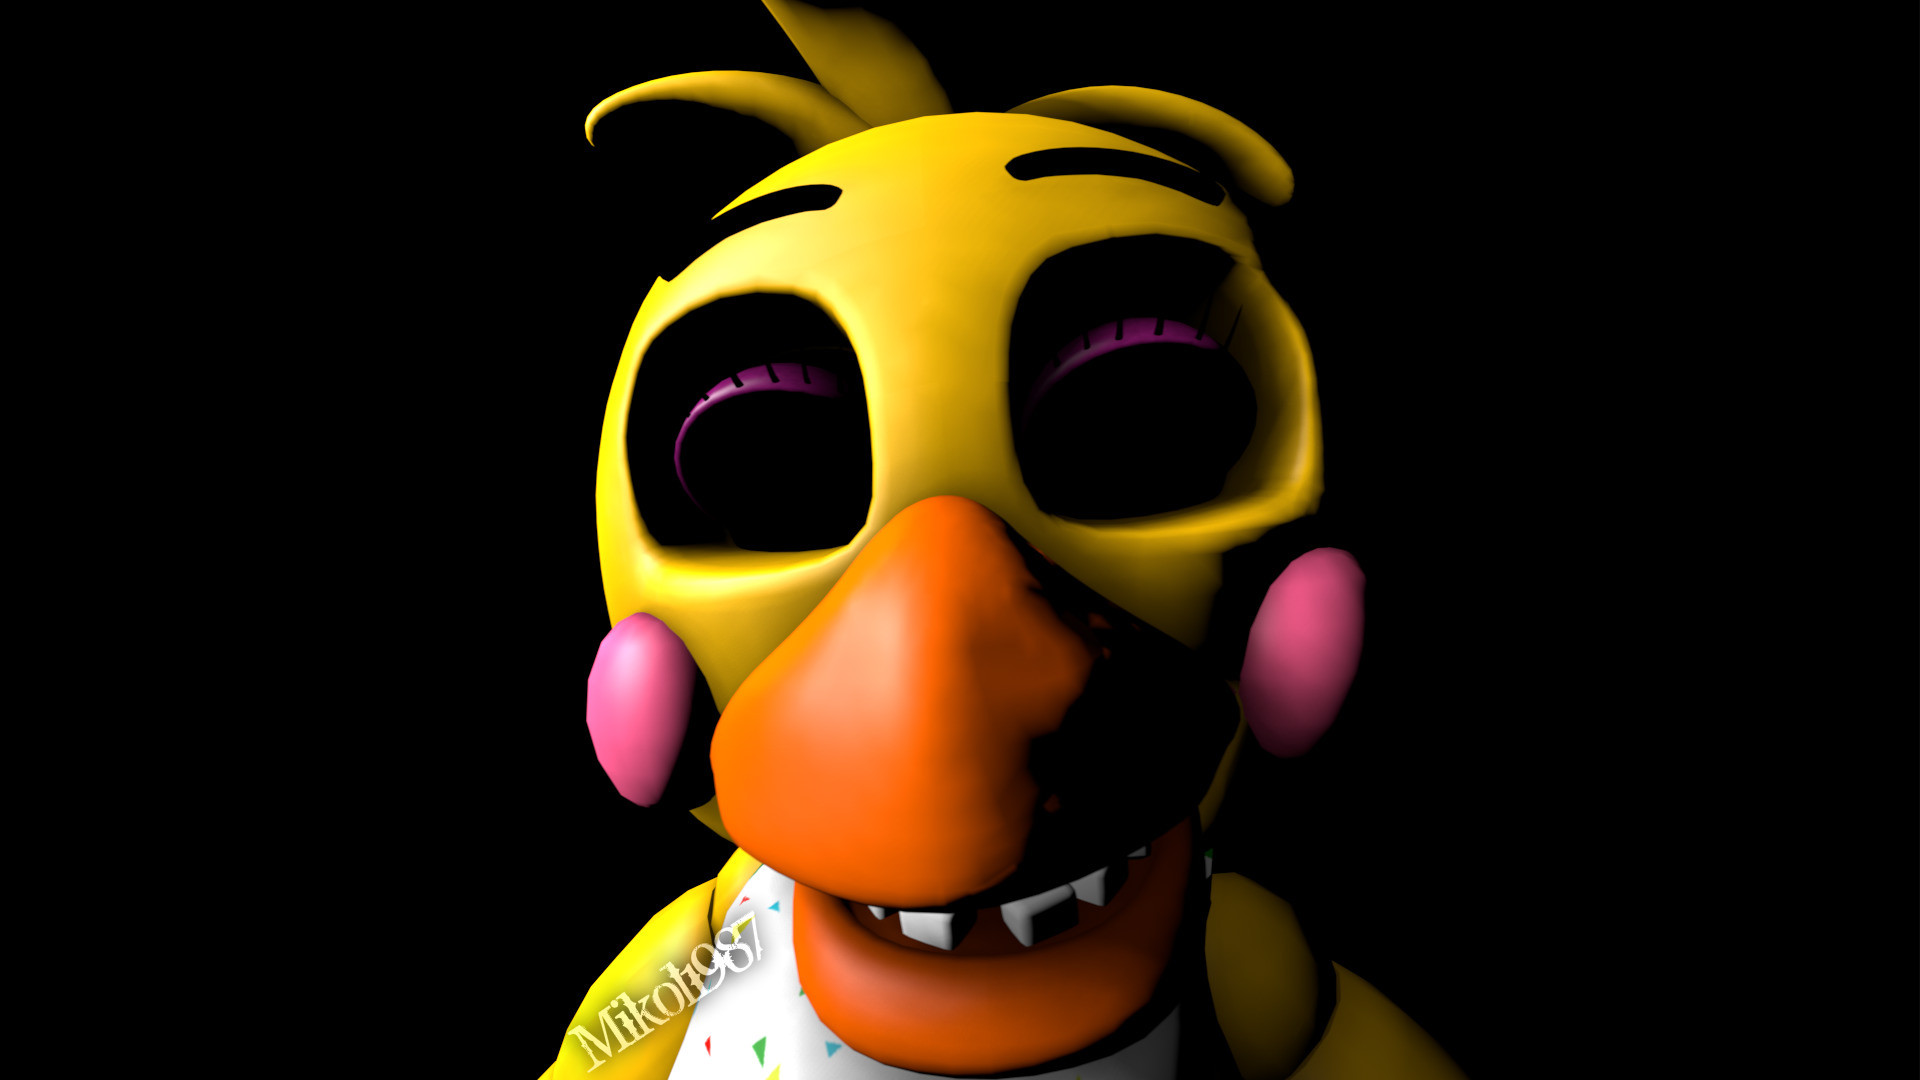 1920x1080 FNaF SFM: Toy Chica rare screen by Mikol1987 on DeviantArt